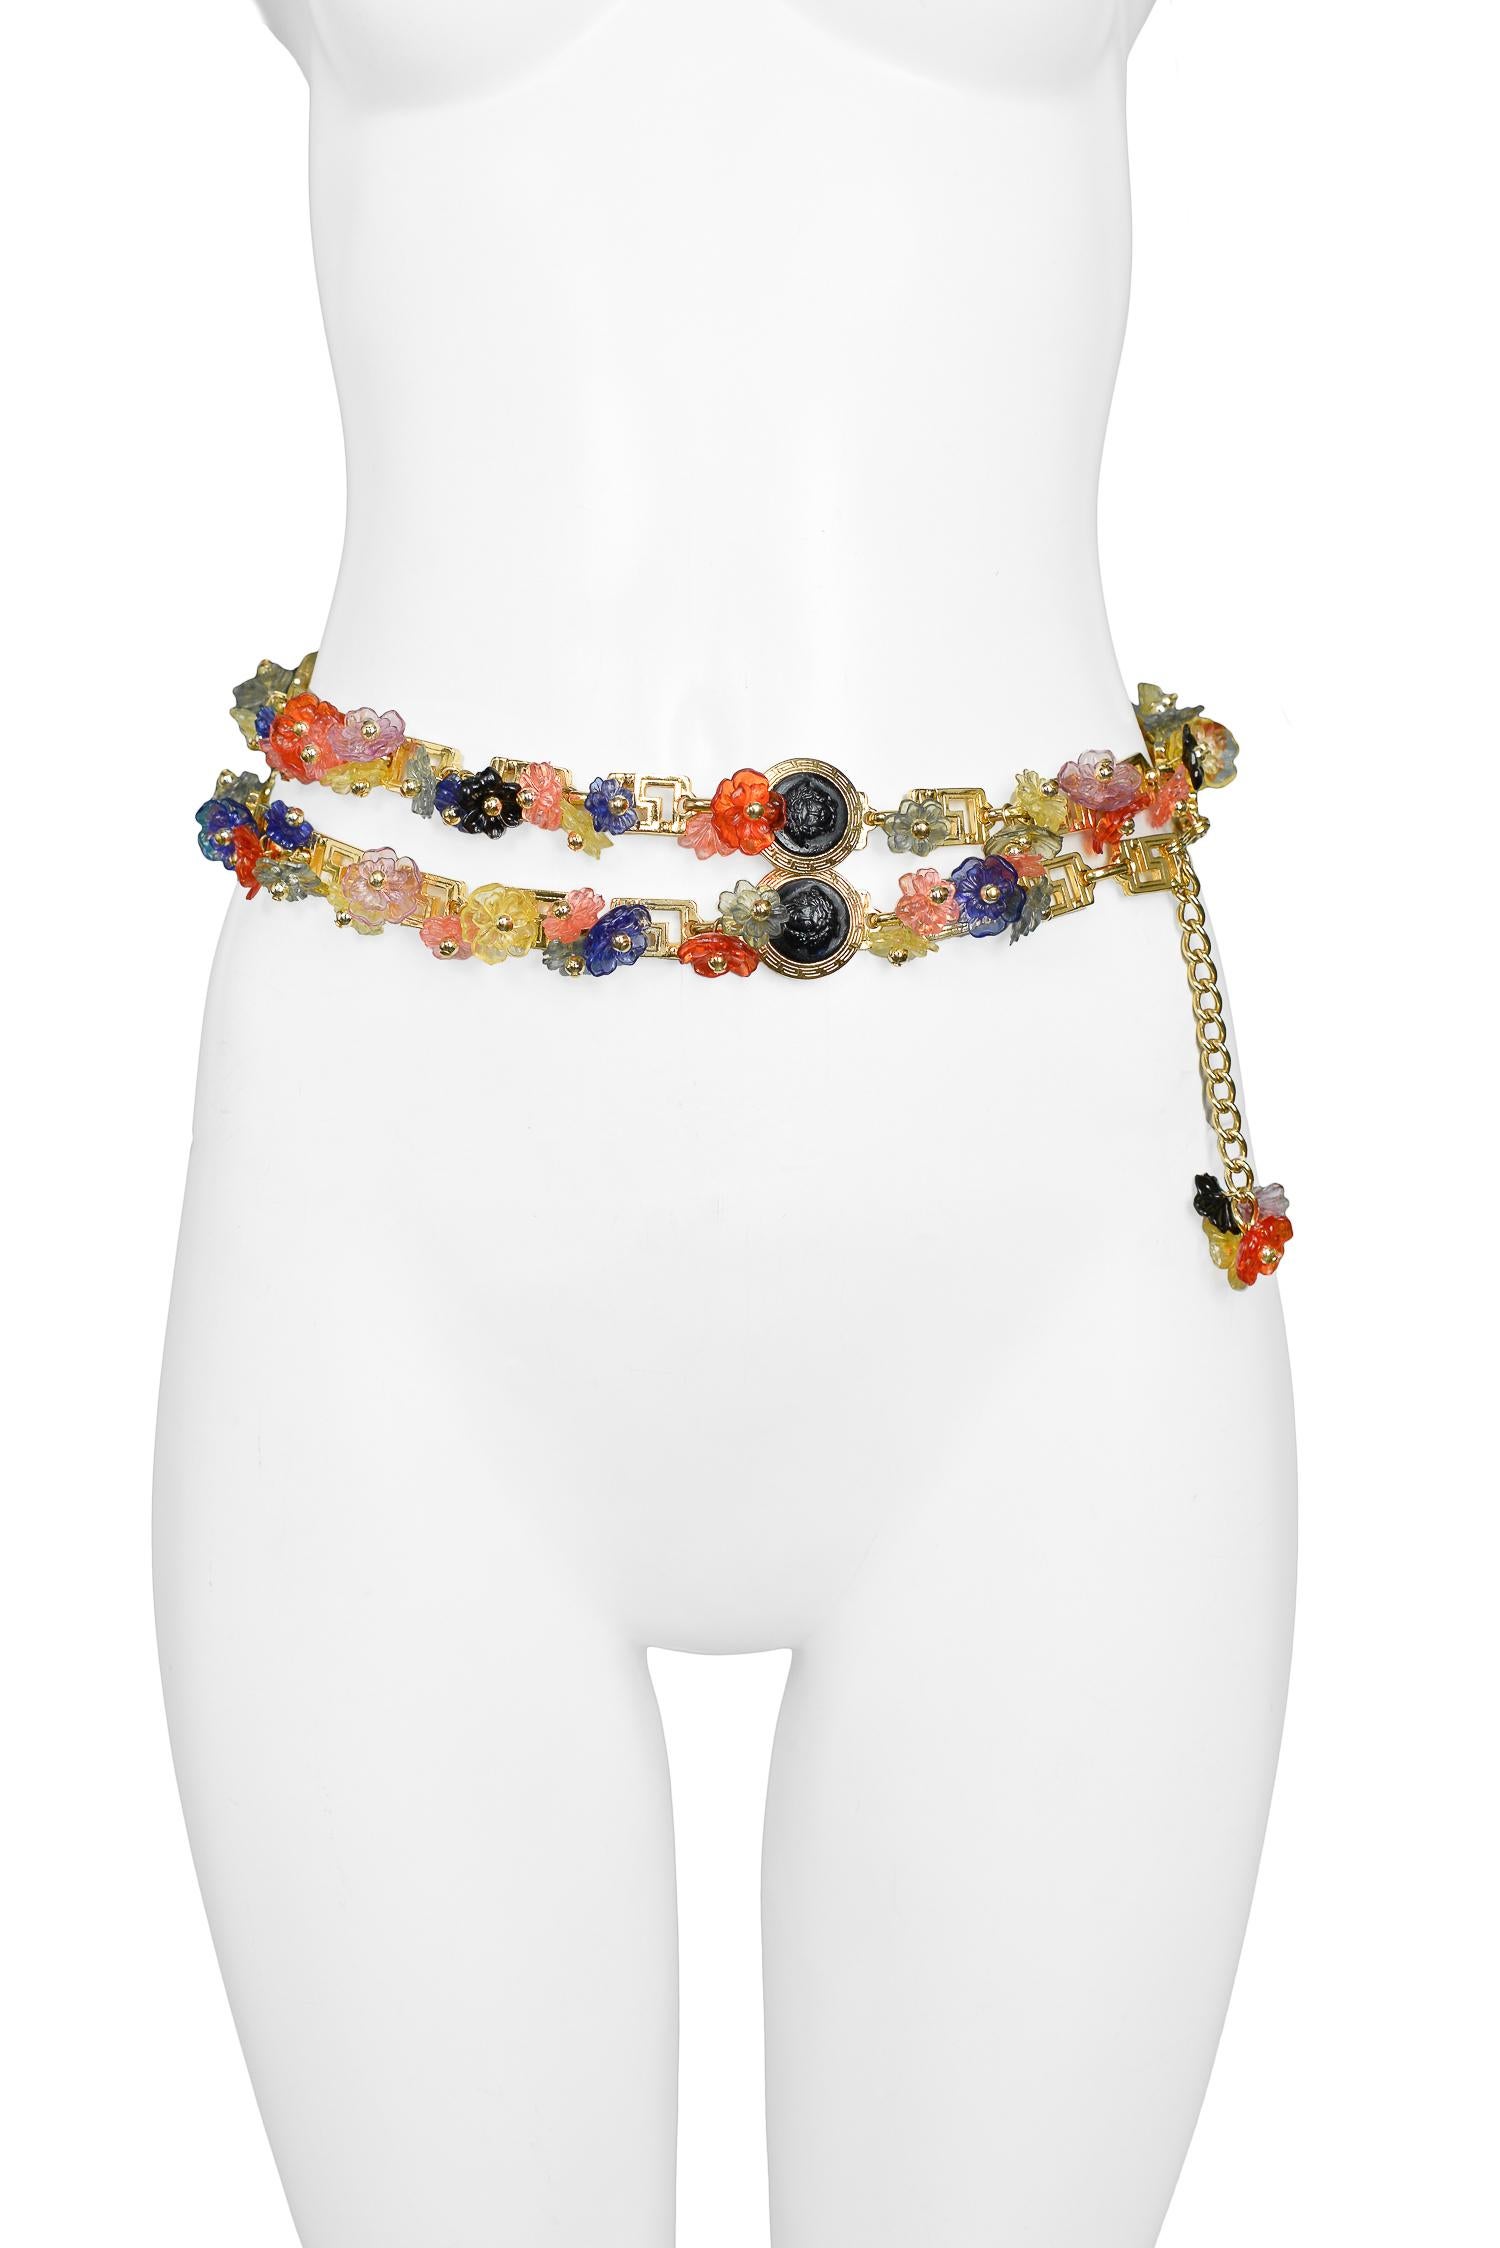 Vintage Gianni Versace multicolor acrylic floral charm belt with gold beads, black Medusa medallions, and greco links. Circa, 1993.

Excellent Condition.

Size: ONE SIZE
